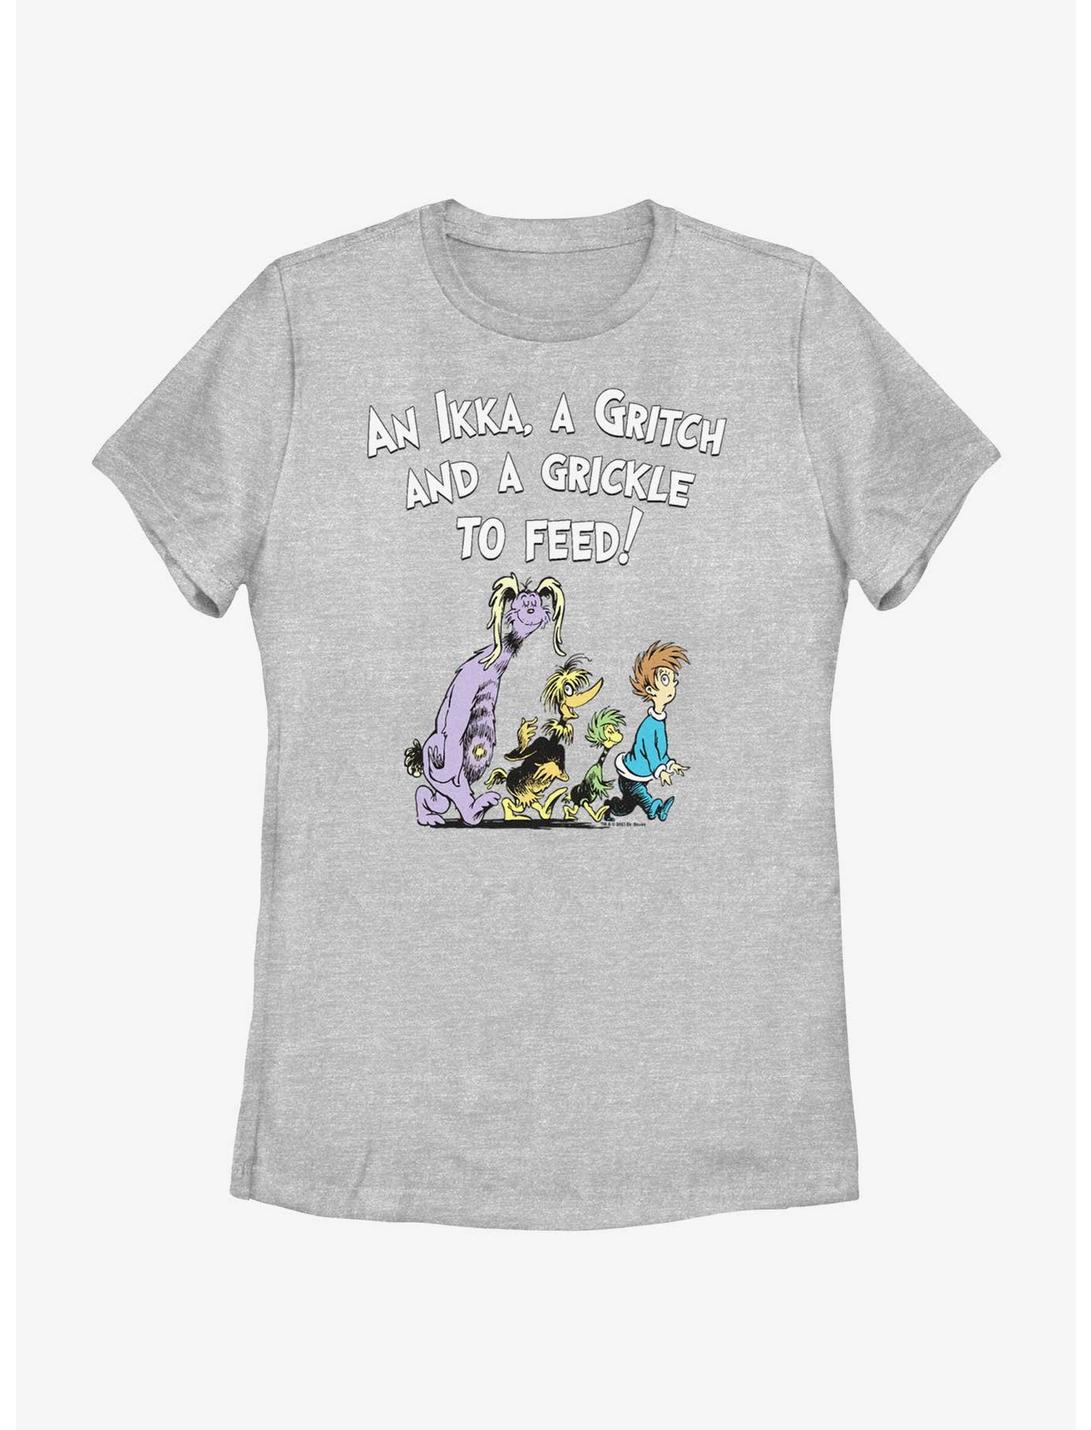 Dr. Seuss's The Bippolo Seed & Other Lost Stories Ikka Gritch Grickle To Feed Womens T-Shirt, ATH HTR, hi-res